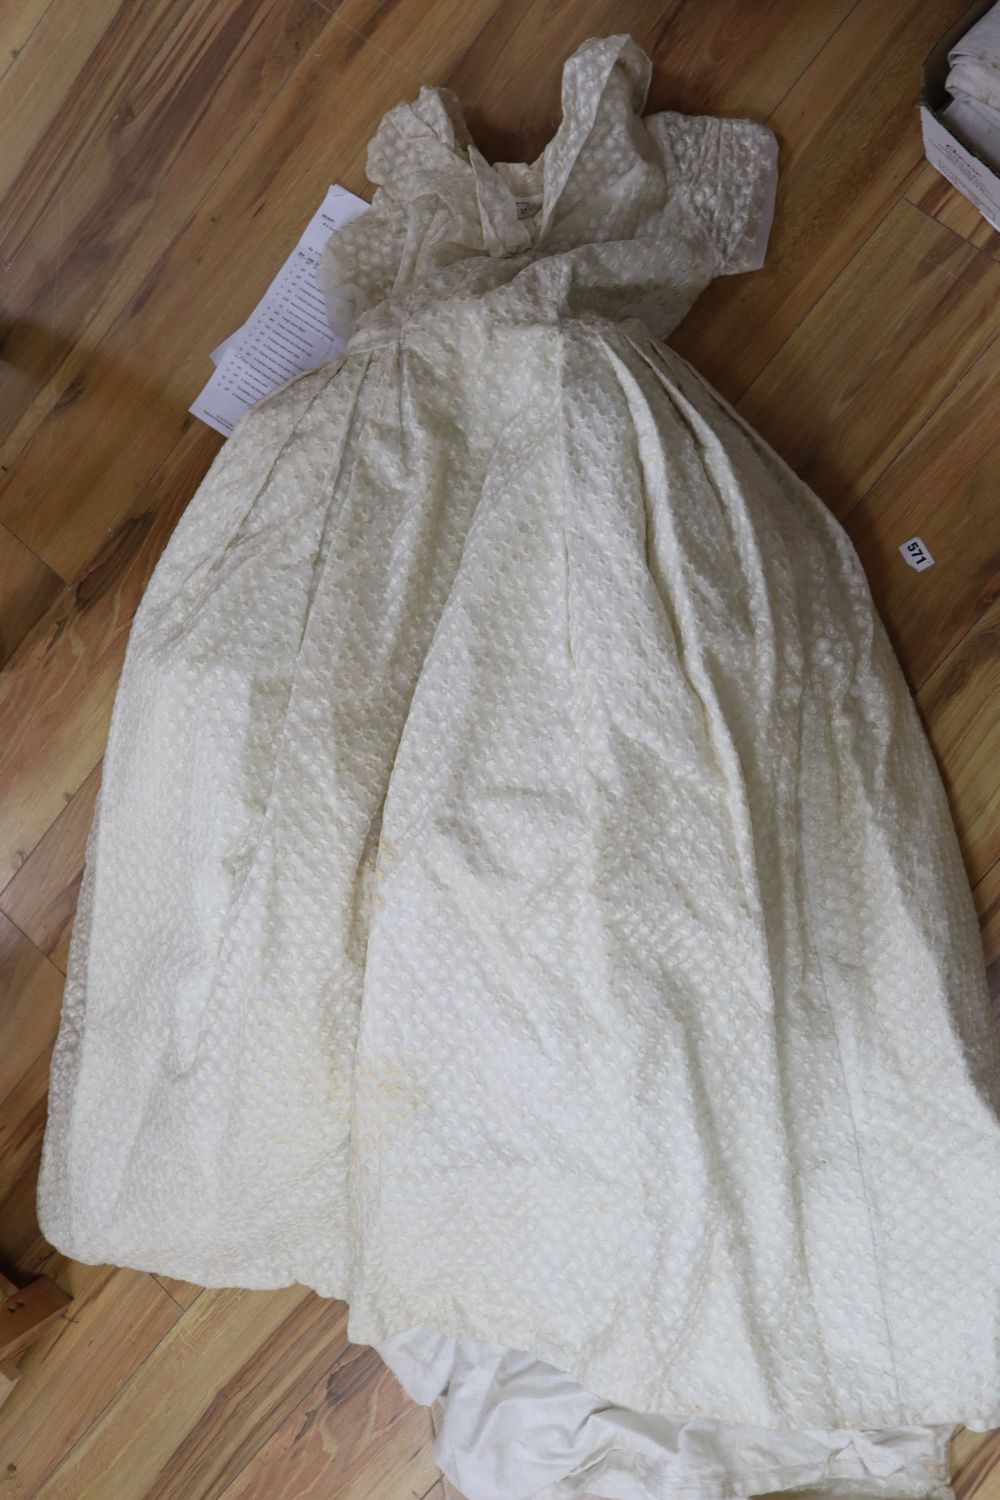 A late 1940s / early 1950s off white embroidered wedding dress and a pair of satin shoes